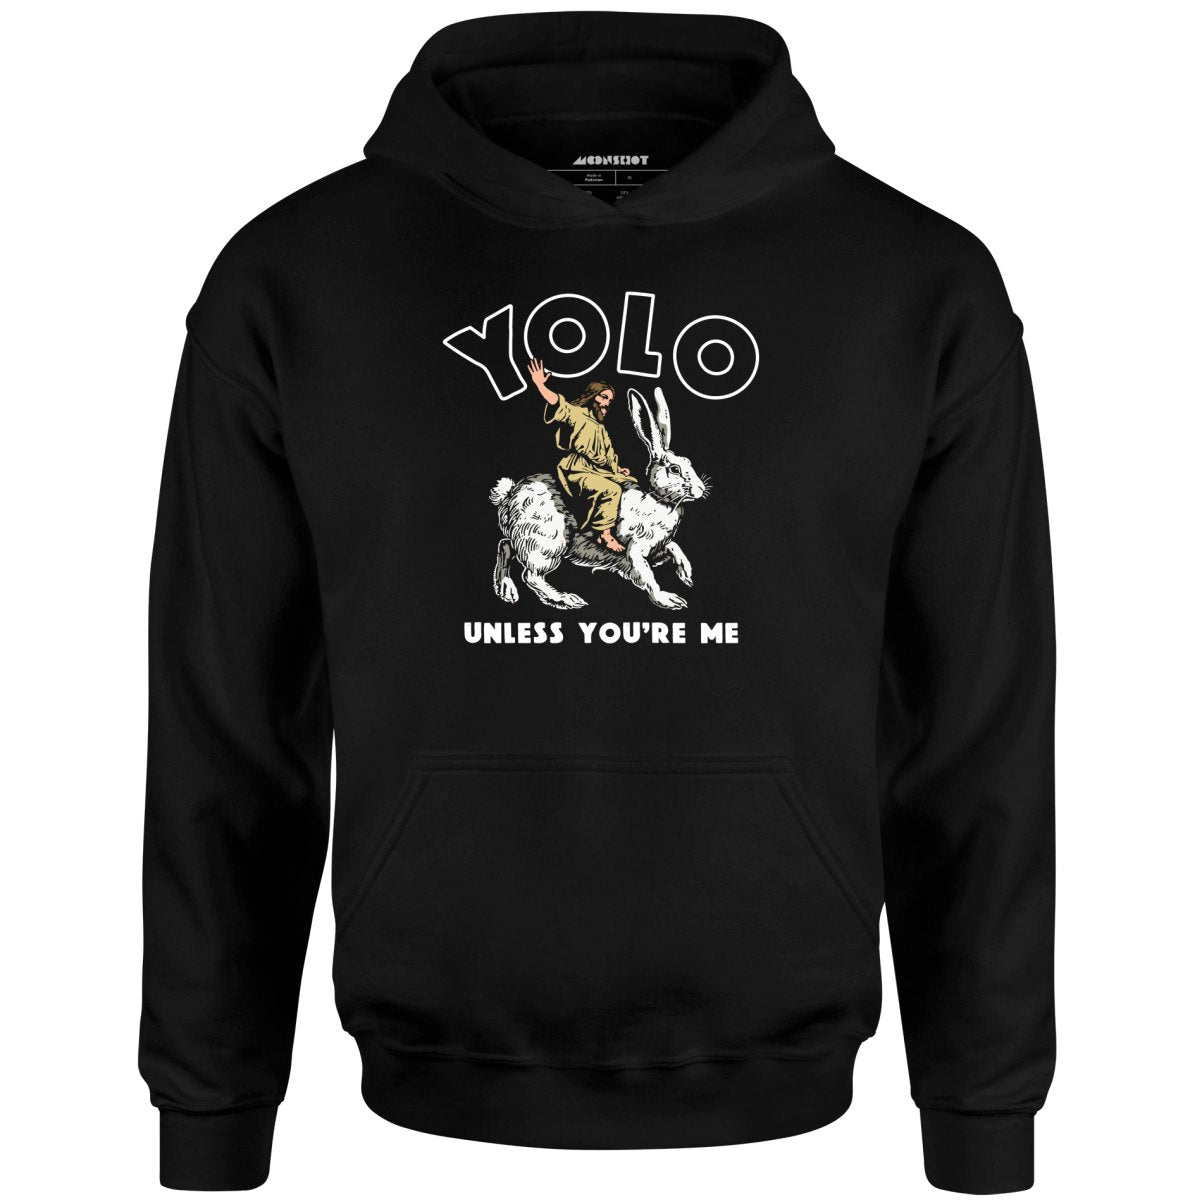 Yolo - Unless You're Me - Unisex Hoodie